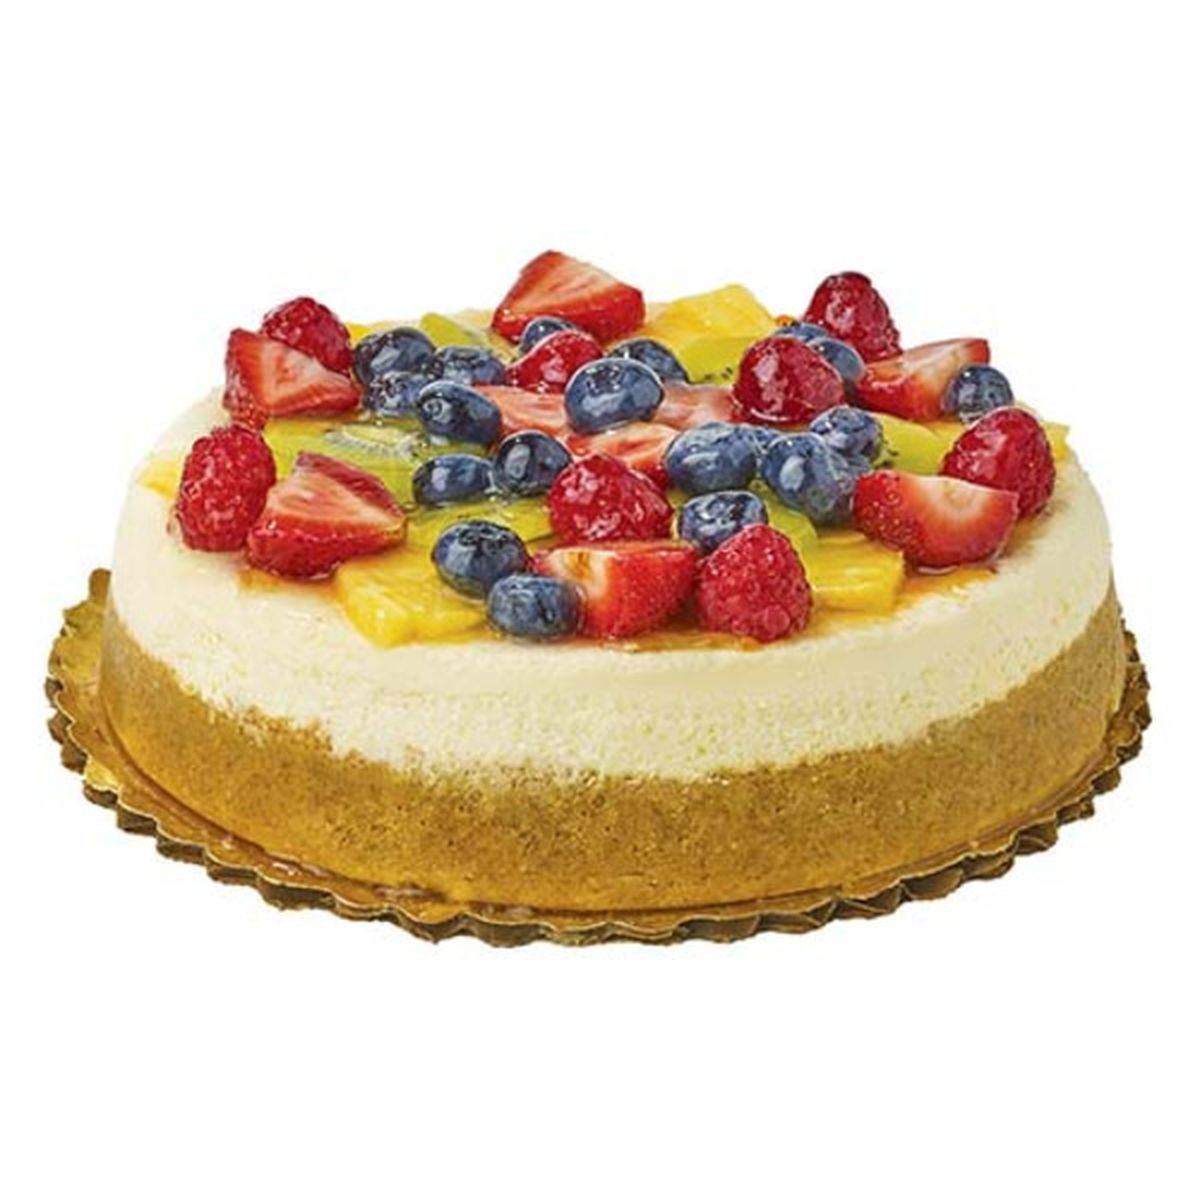 Calories in Wegmans Large Ultimate Fresh Fruit Topped Cheesecake